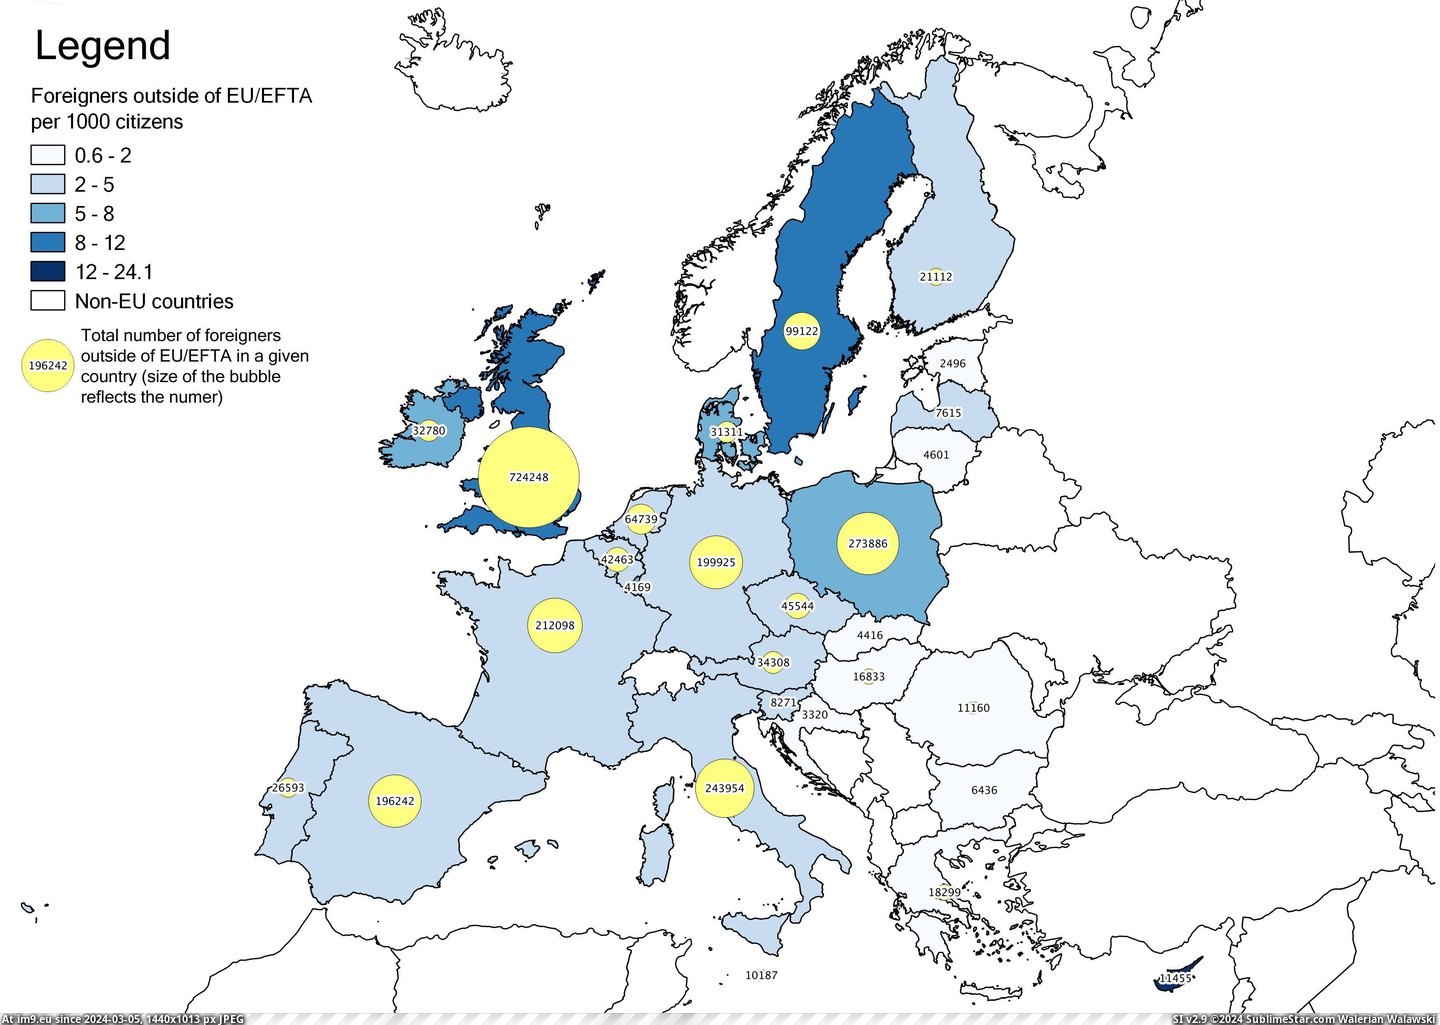 #Europe #Foreigners #Visas #Temporary #Efta [Mapporn] Temporary visas for foreigners outside of EU-EFTA in Europe in 2013 [OC] [3507×2480px] Pic. (Image of album My r/MAPS favs))